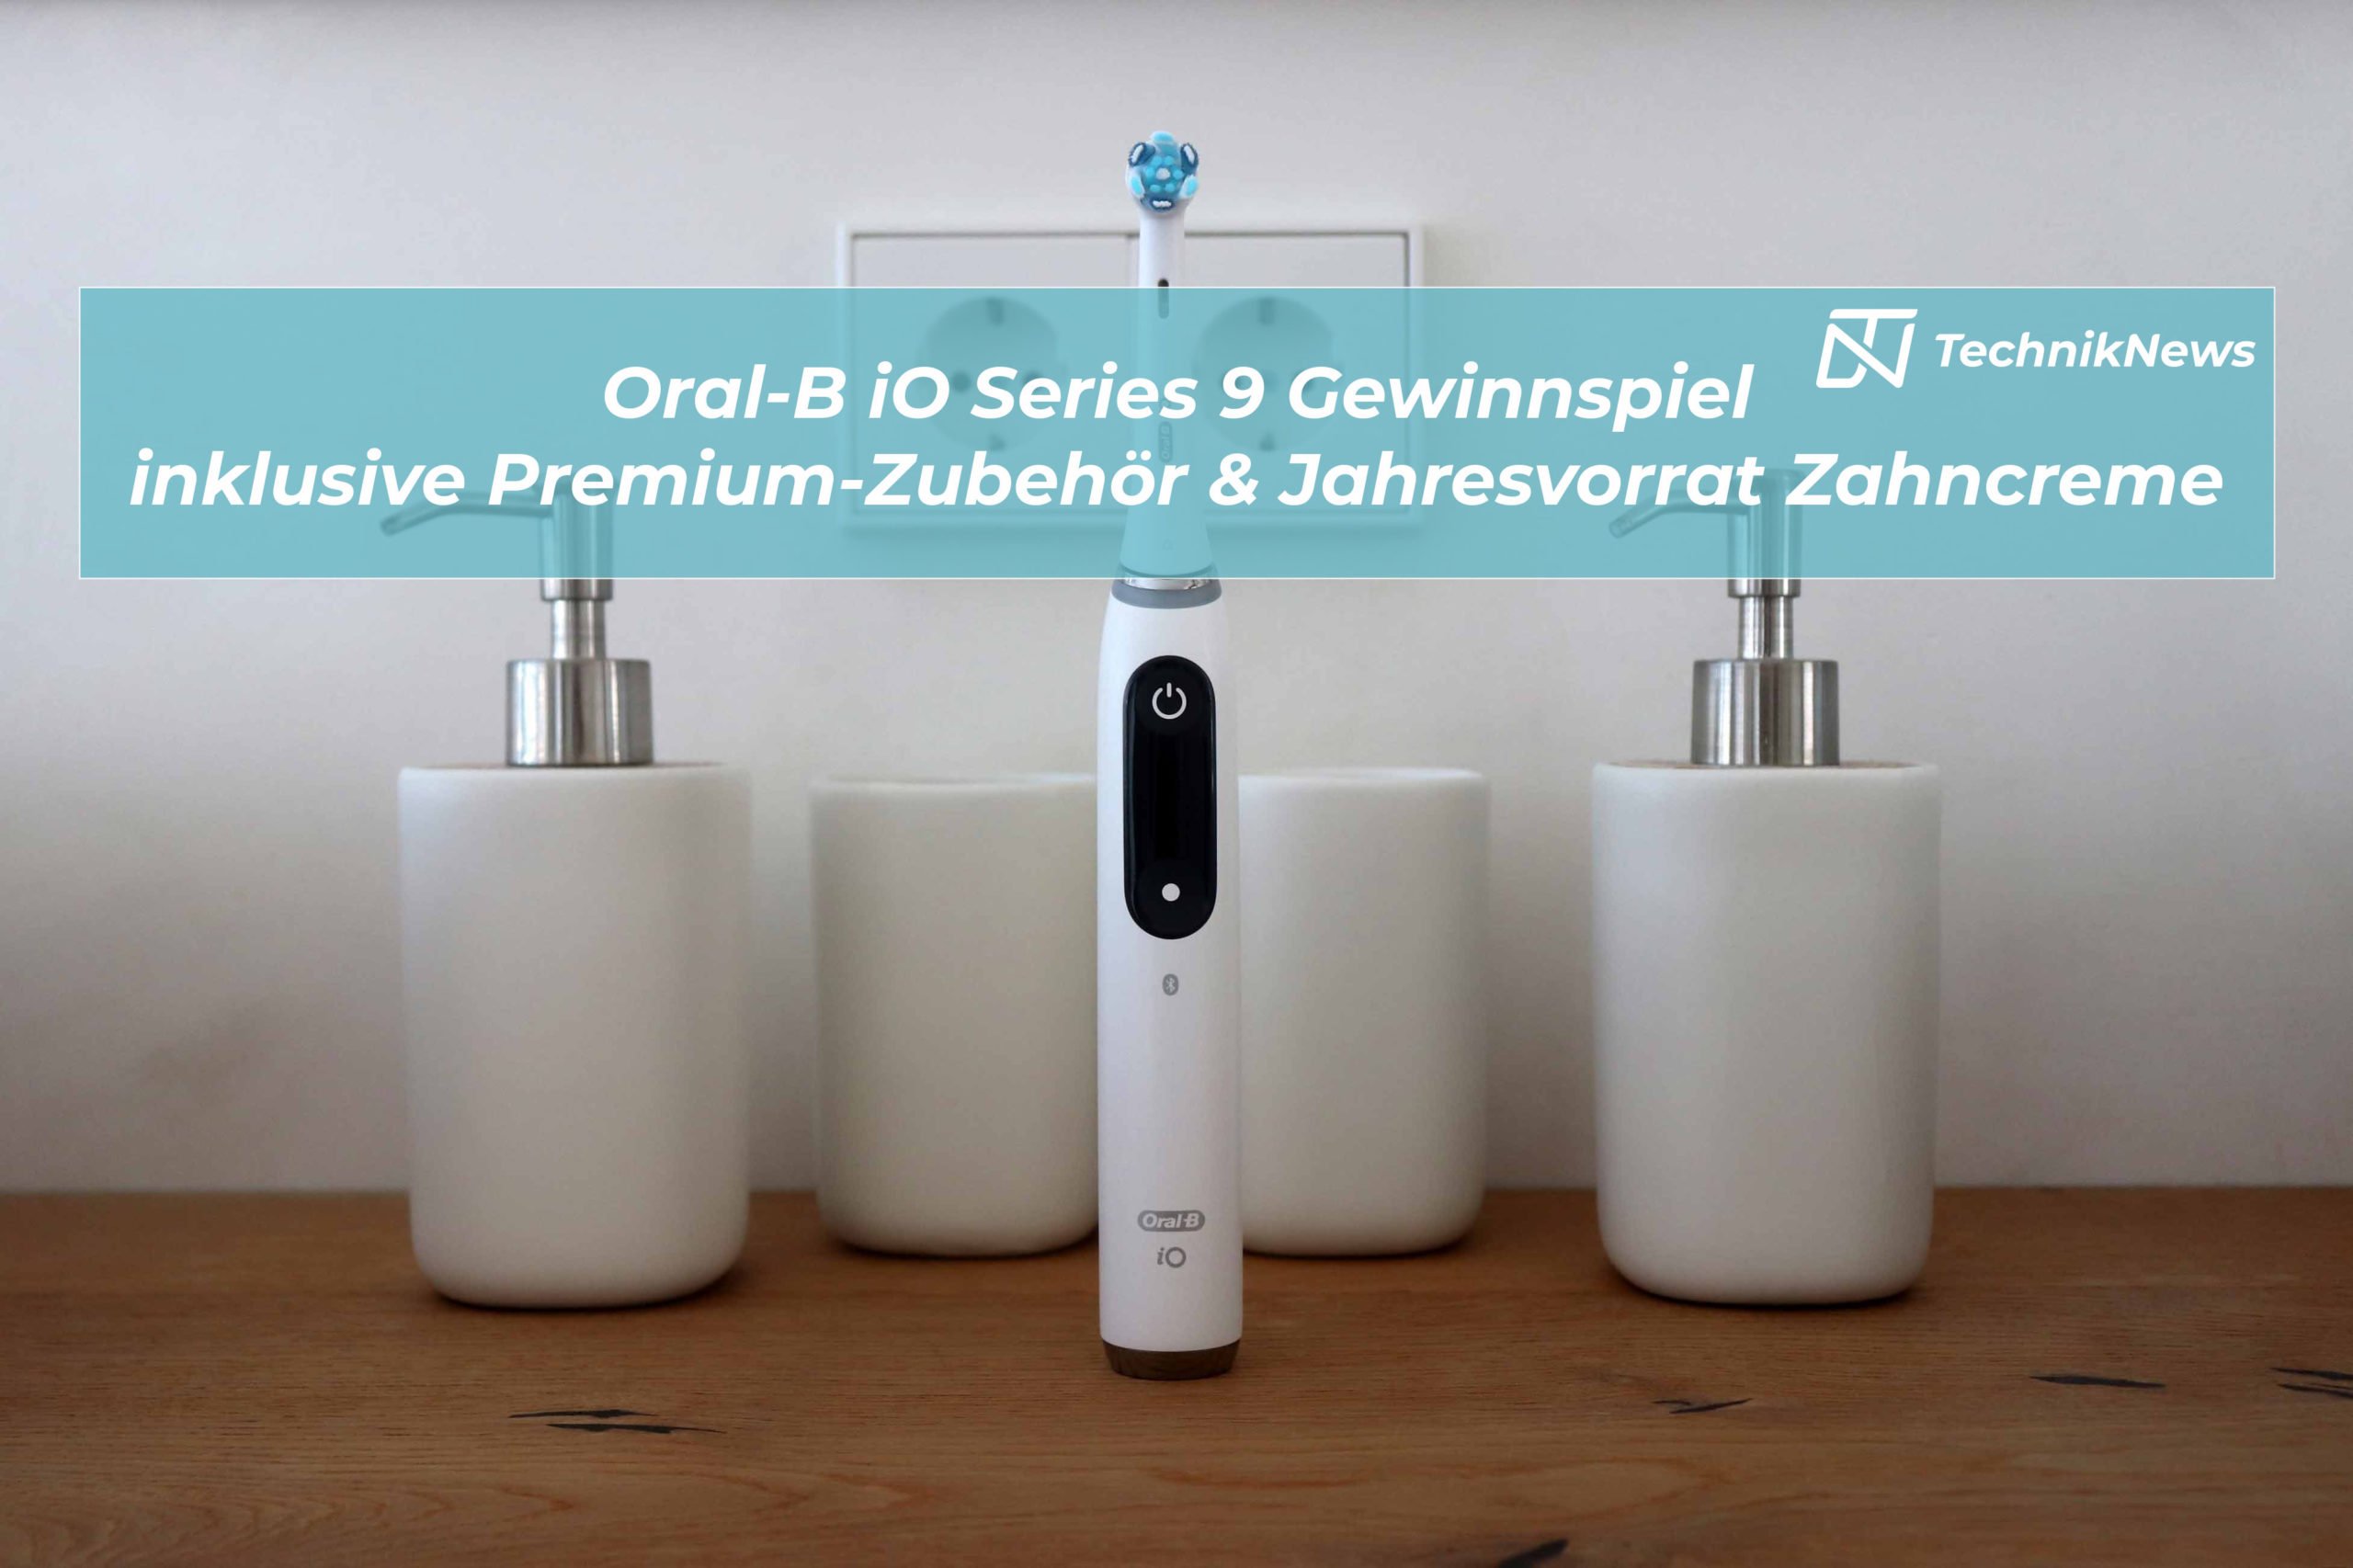 Oral-B iO Series 9 competition